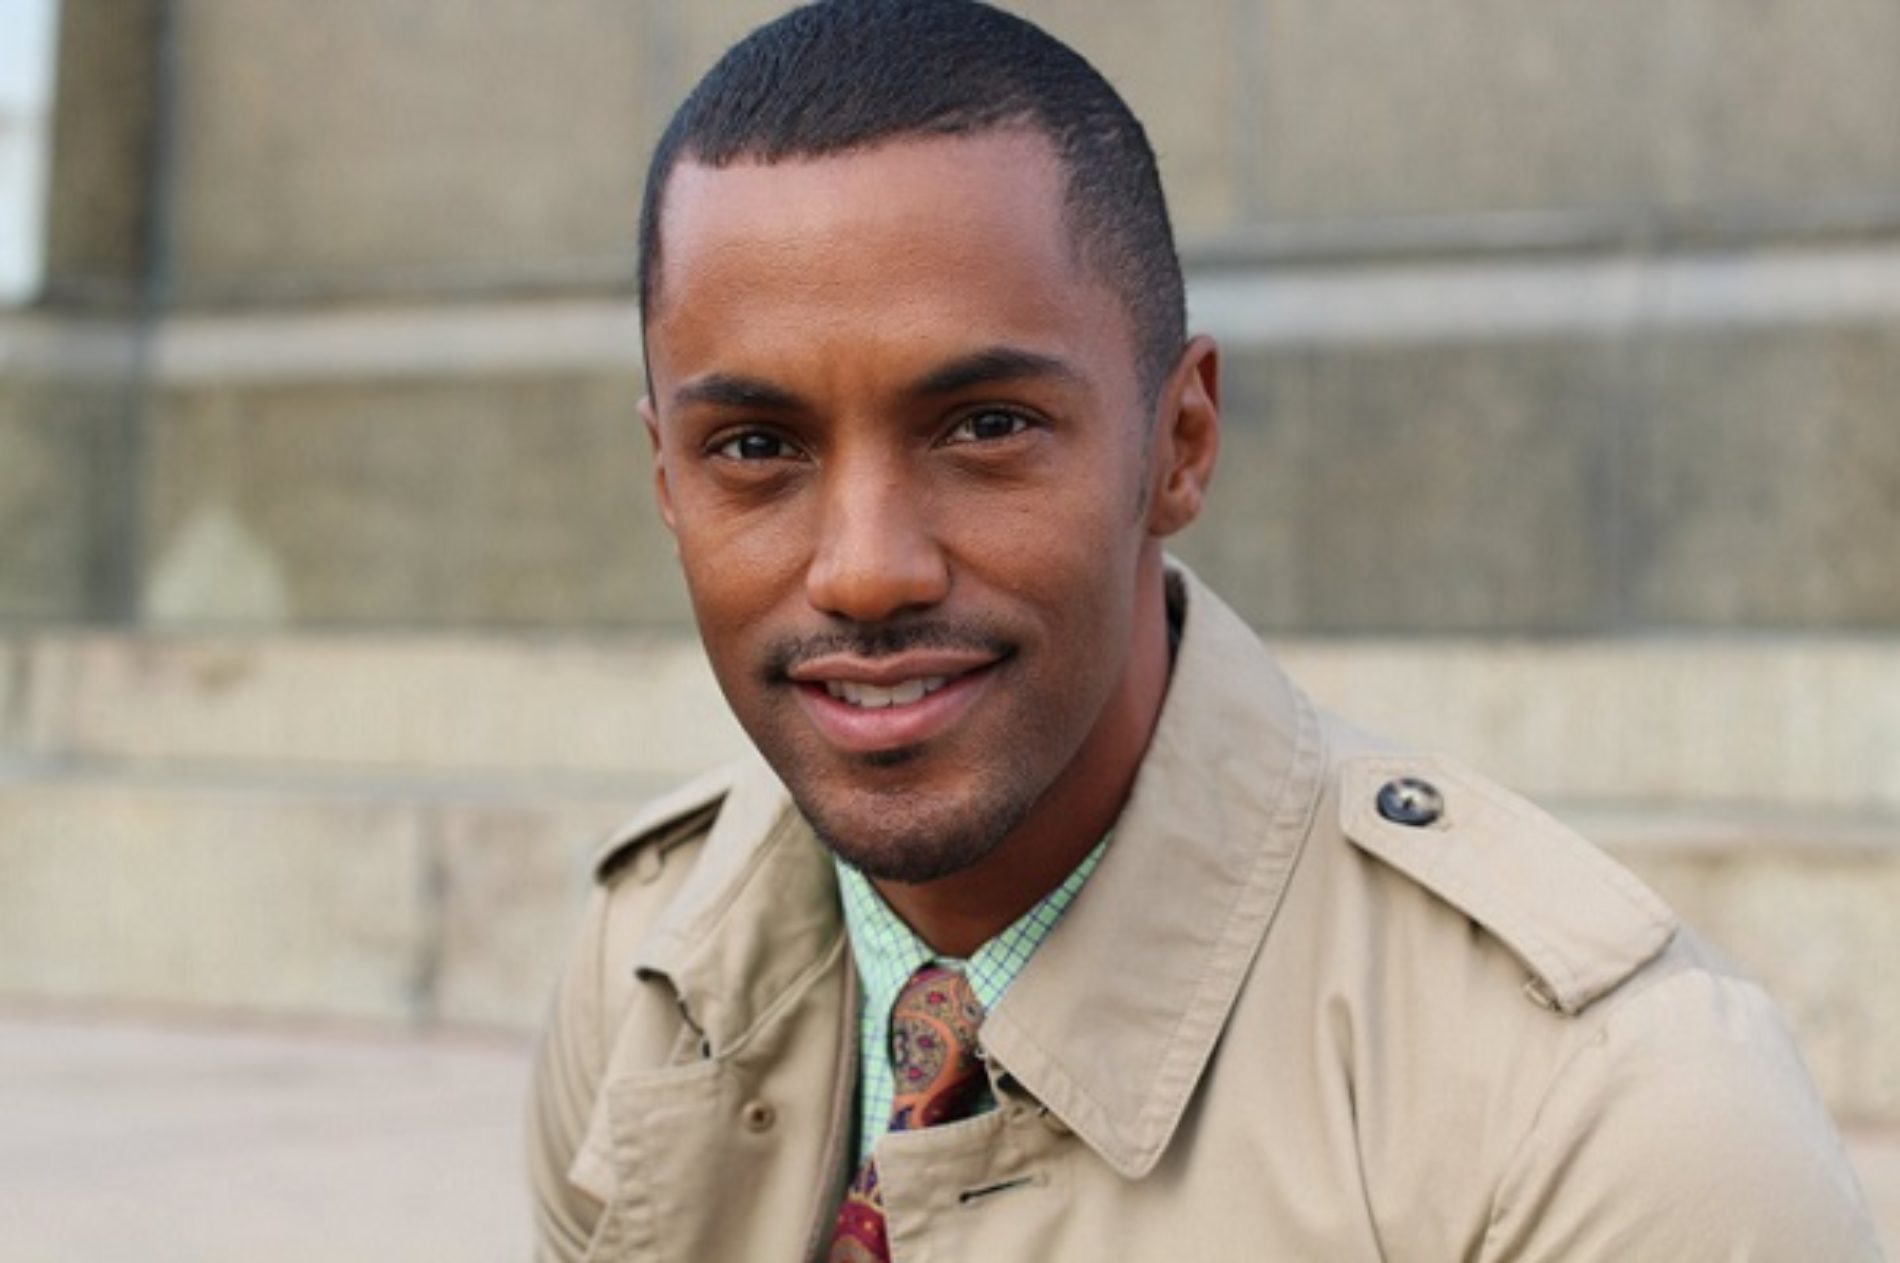 Actor Darryl Stephens speaks on his struggles with being black and gay in Hollywood